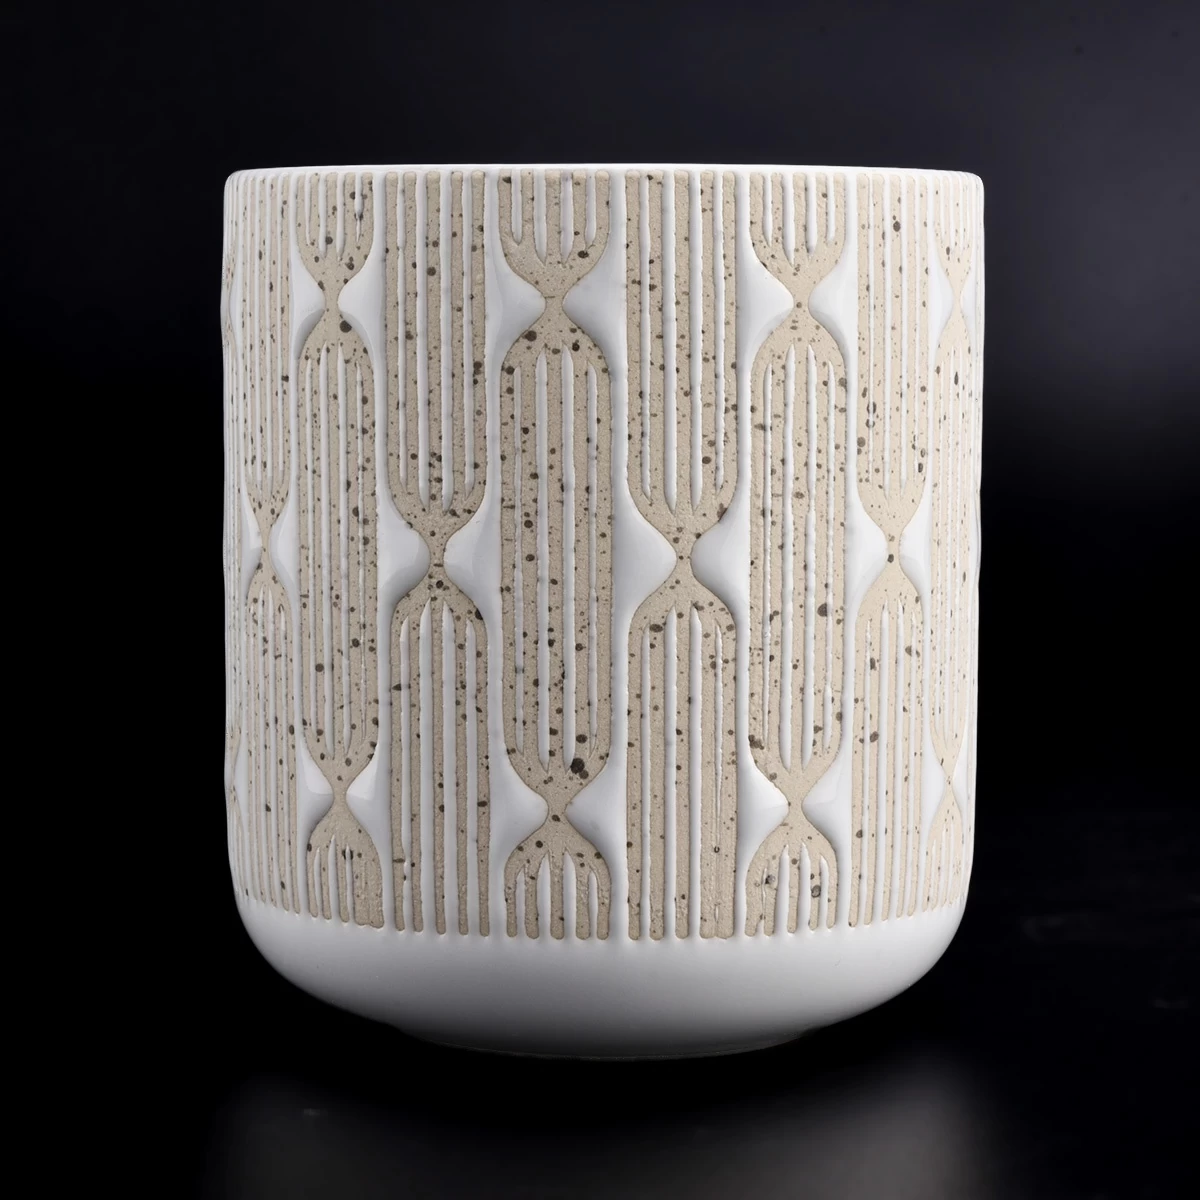 Ceramic candle jar with sand surface pattern